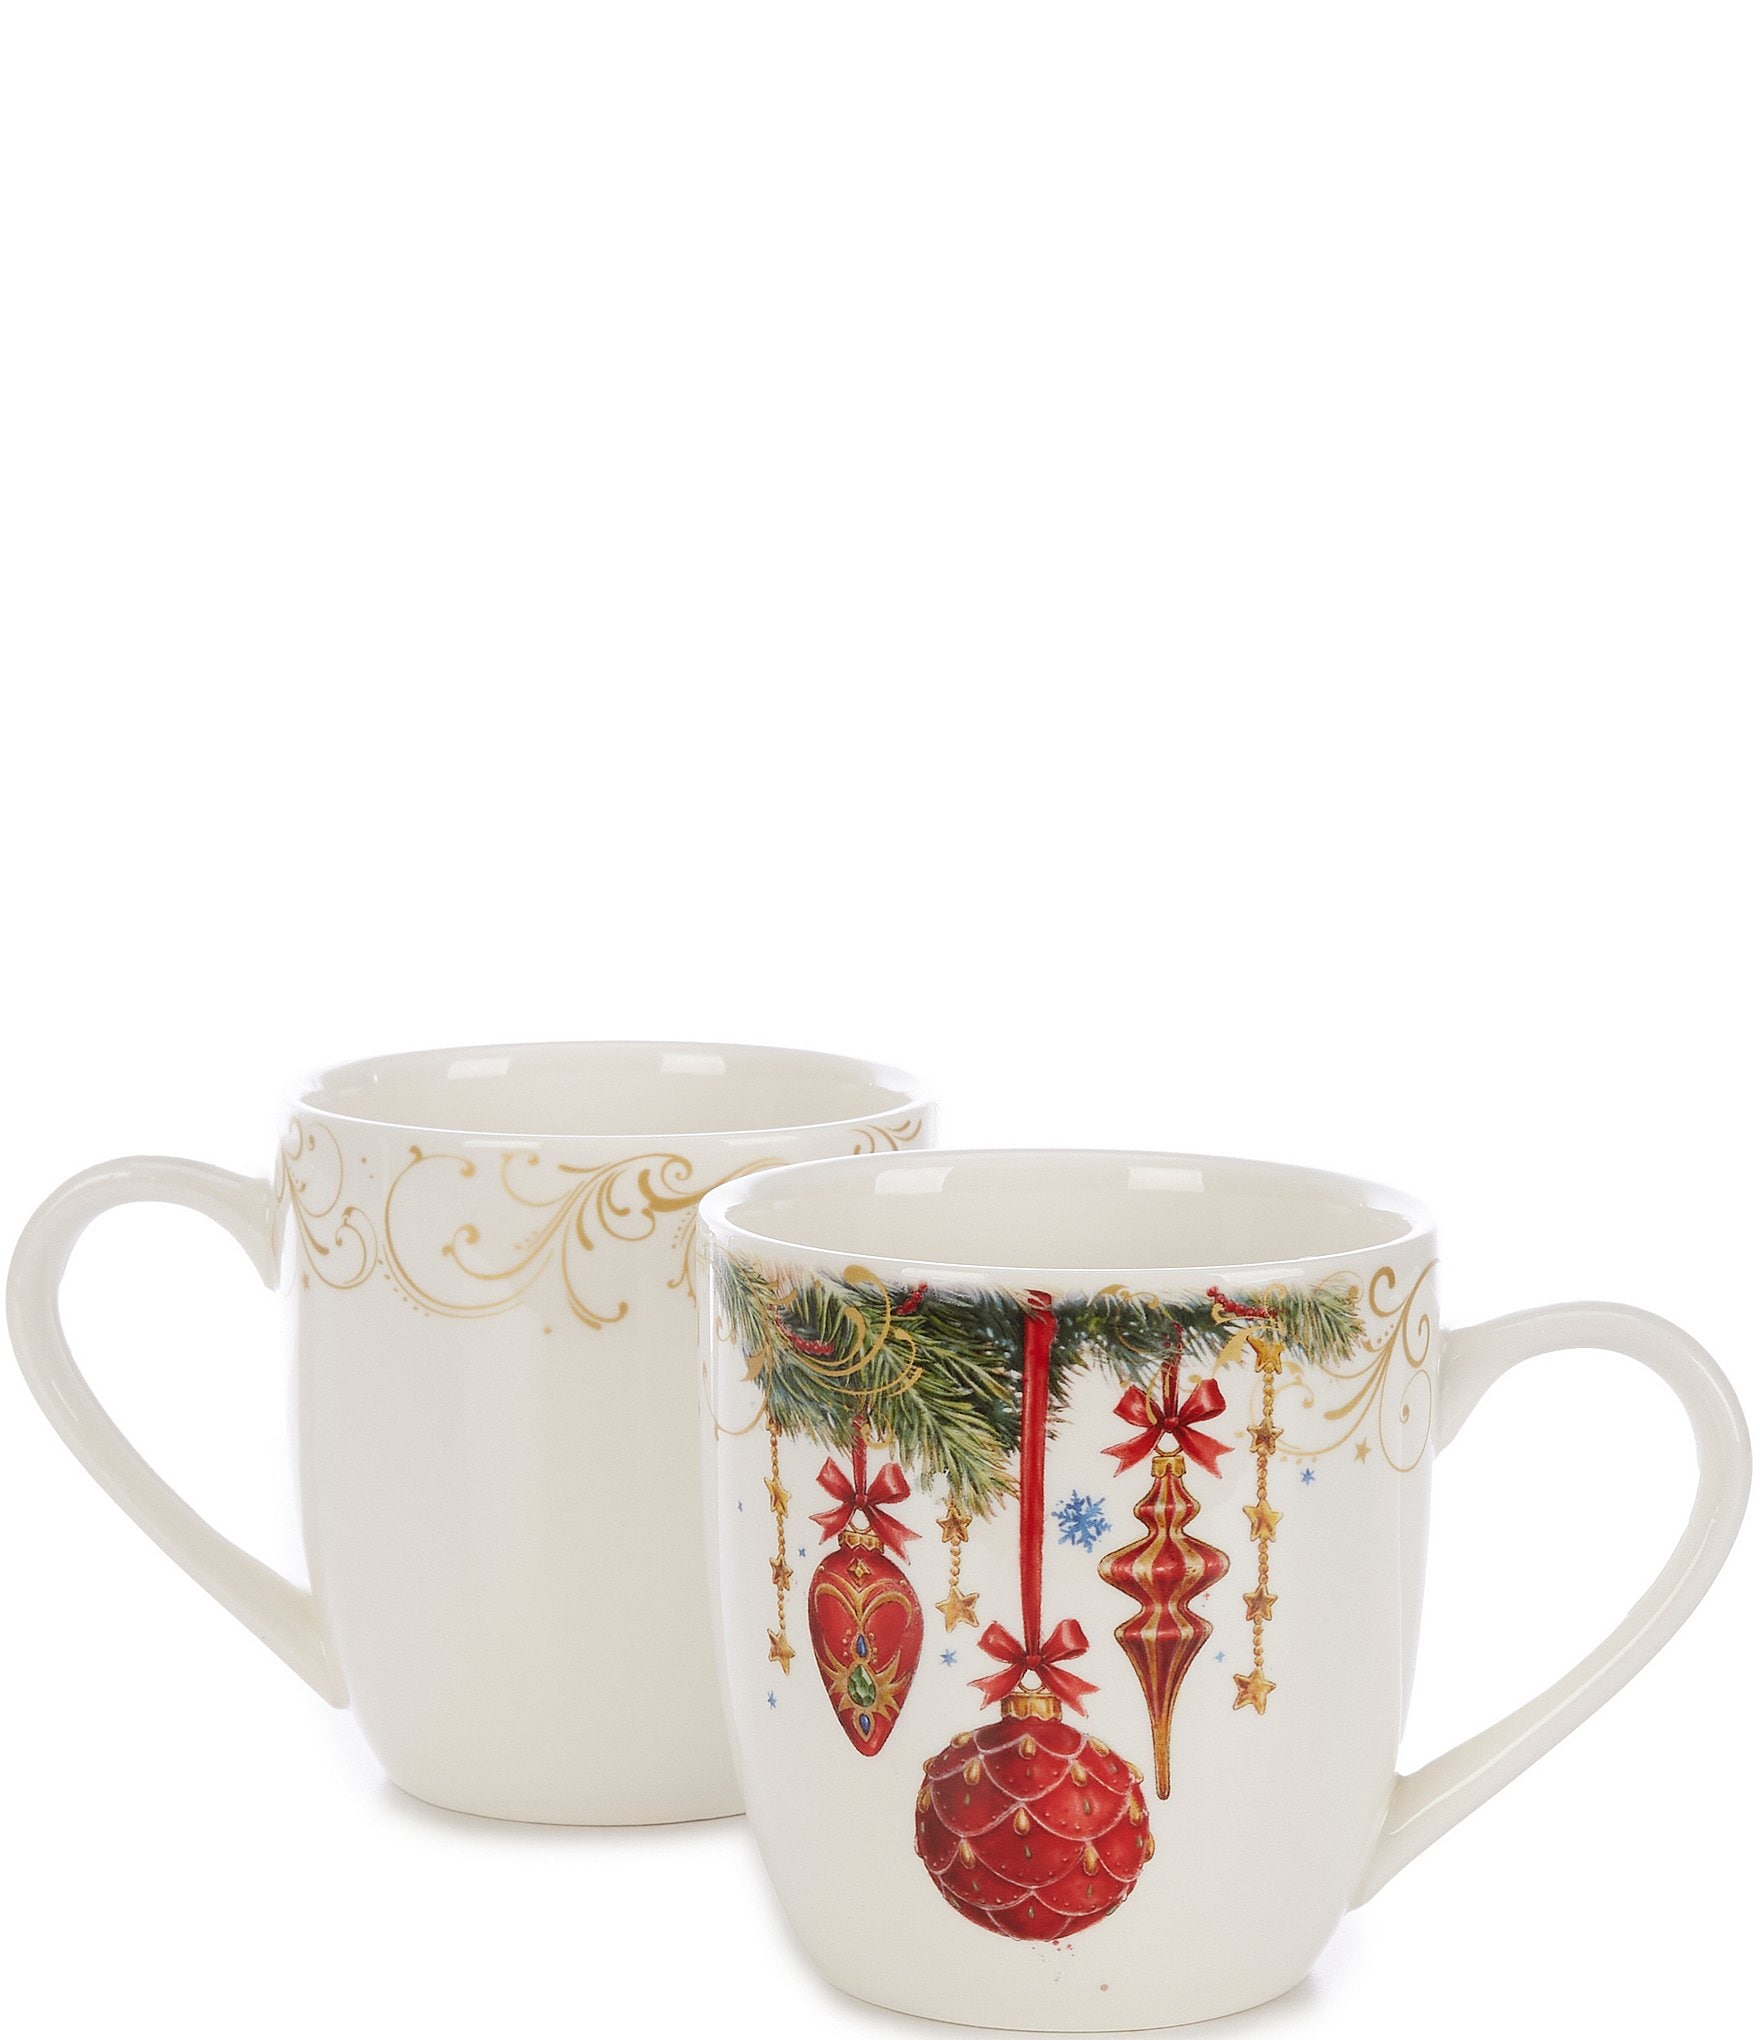 https://dimg.dillards.com/is/image/DillardsZoom/zoom/southern-living-holiday-classic-ornament-coffee-mugs-set-of-2/00000000_zi_d37b6fb0-08d0-4640-bb8b-bd7460d0ee4a.jpg